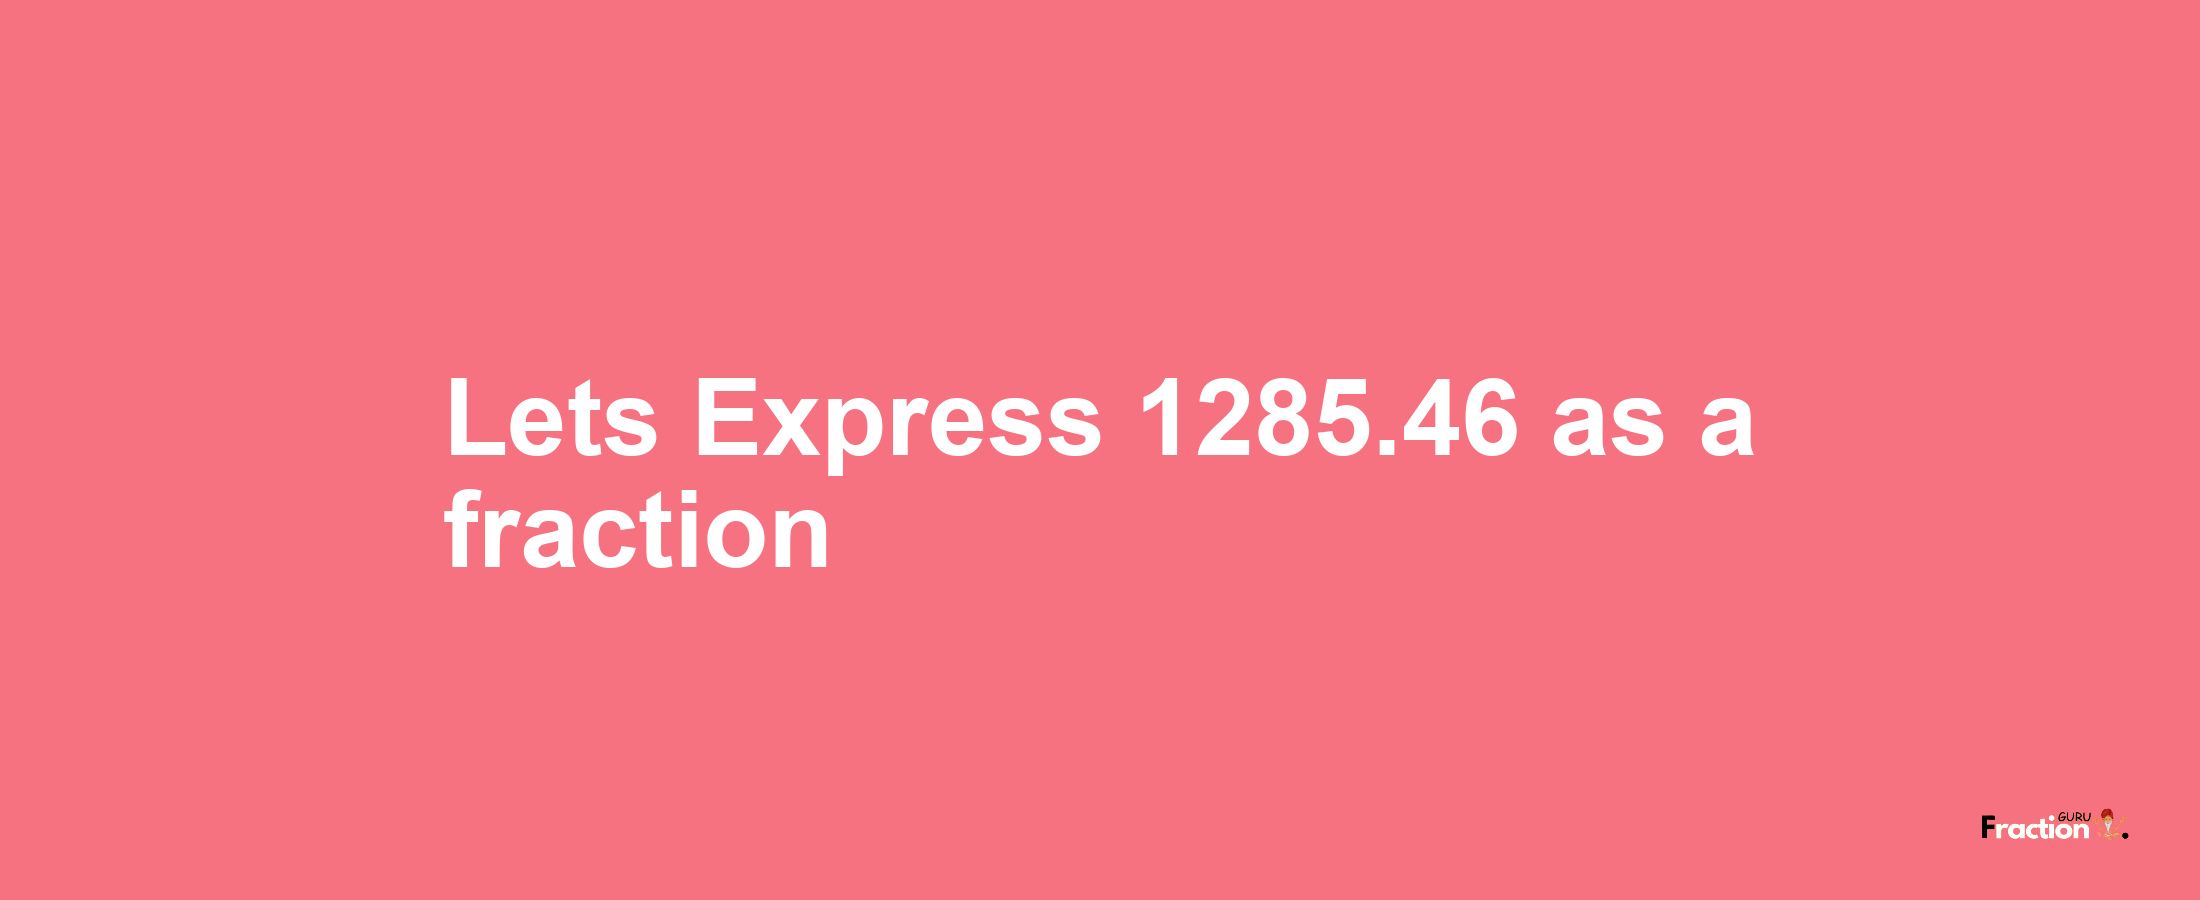 Lets Express 1285.46 as afraction